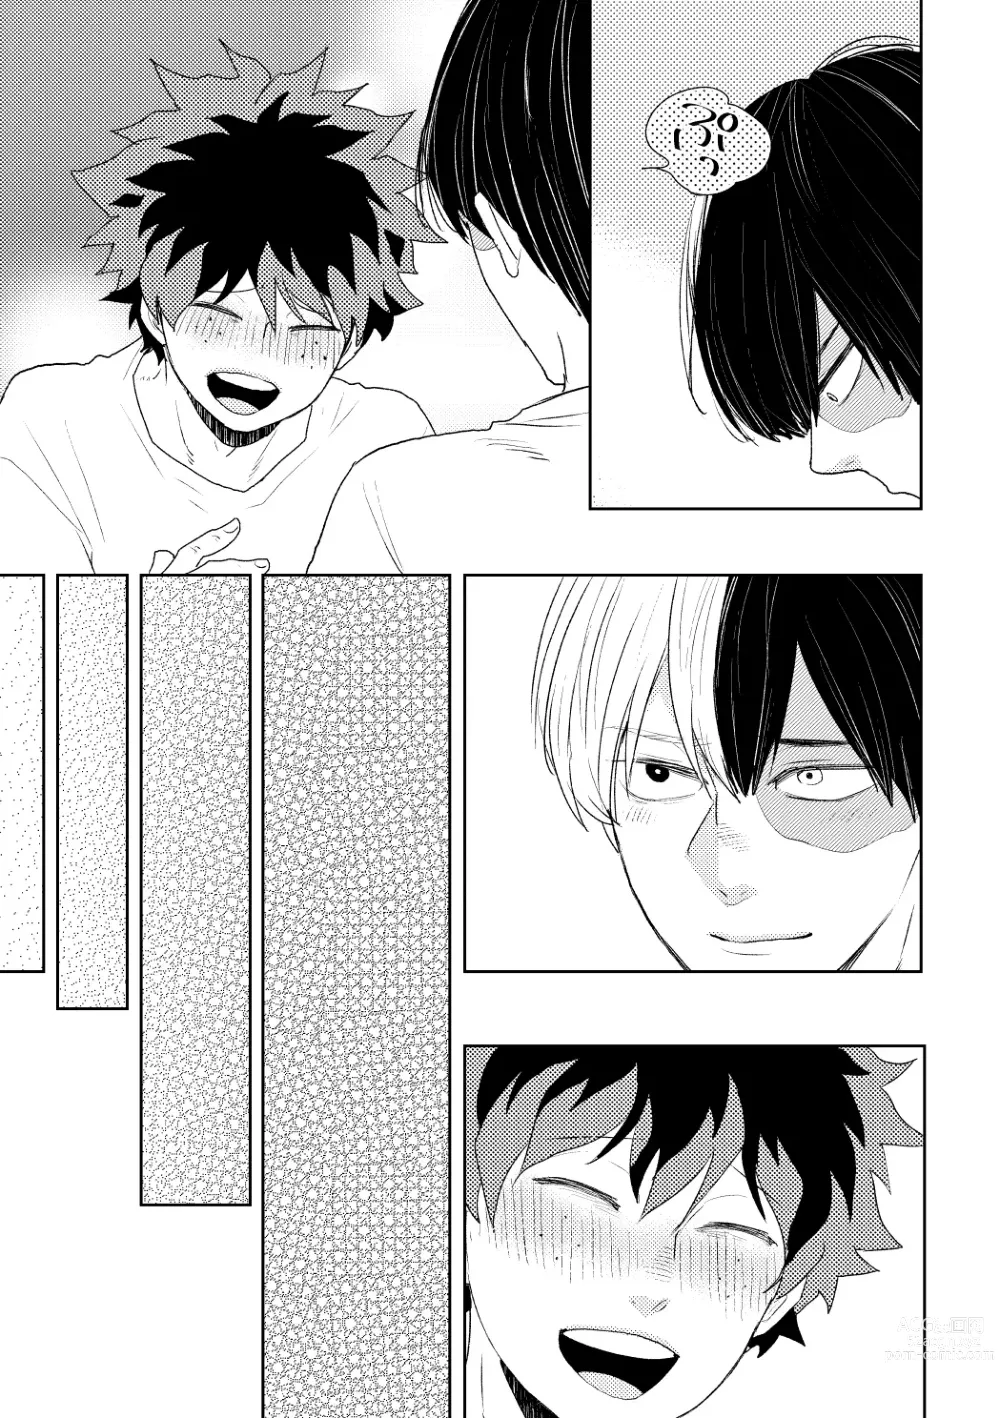 Page 54 of doujinshi DISTANCE